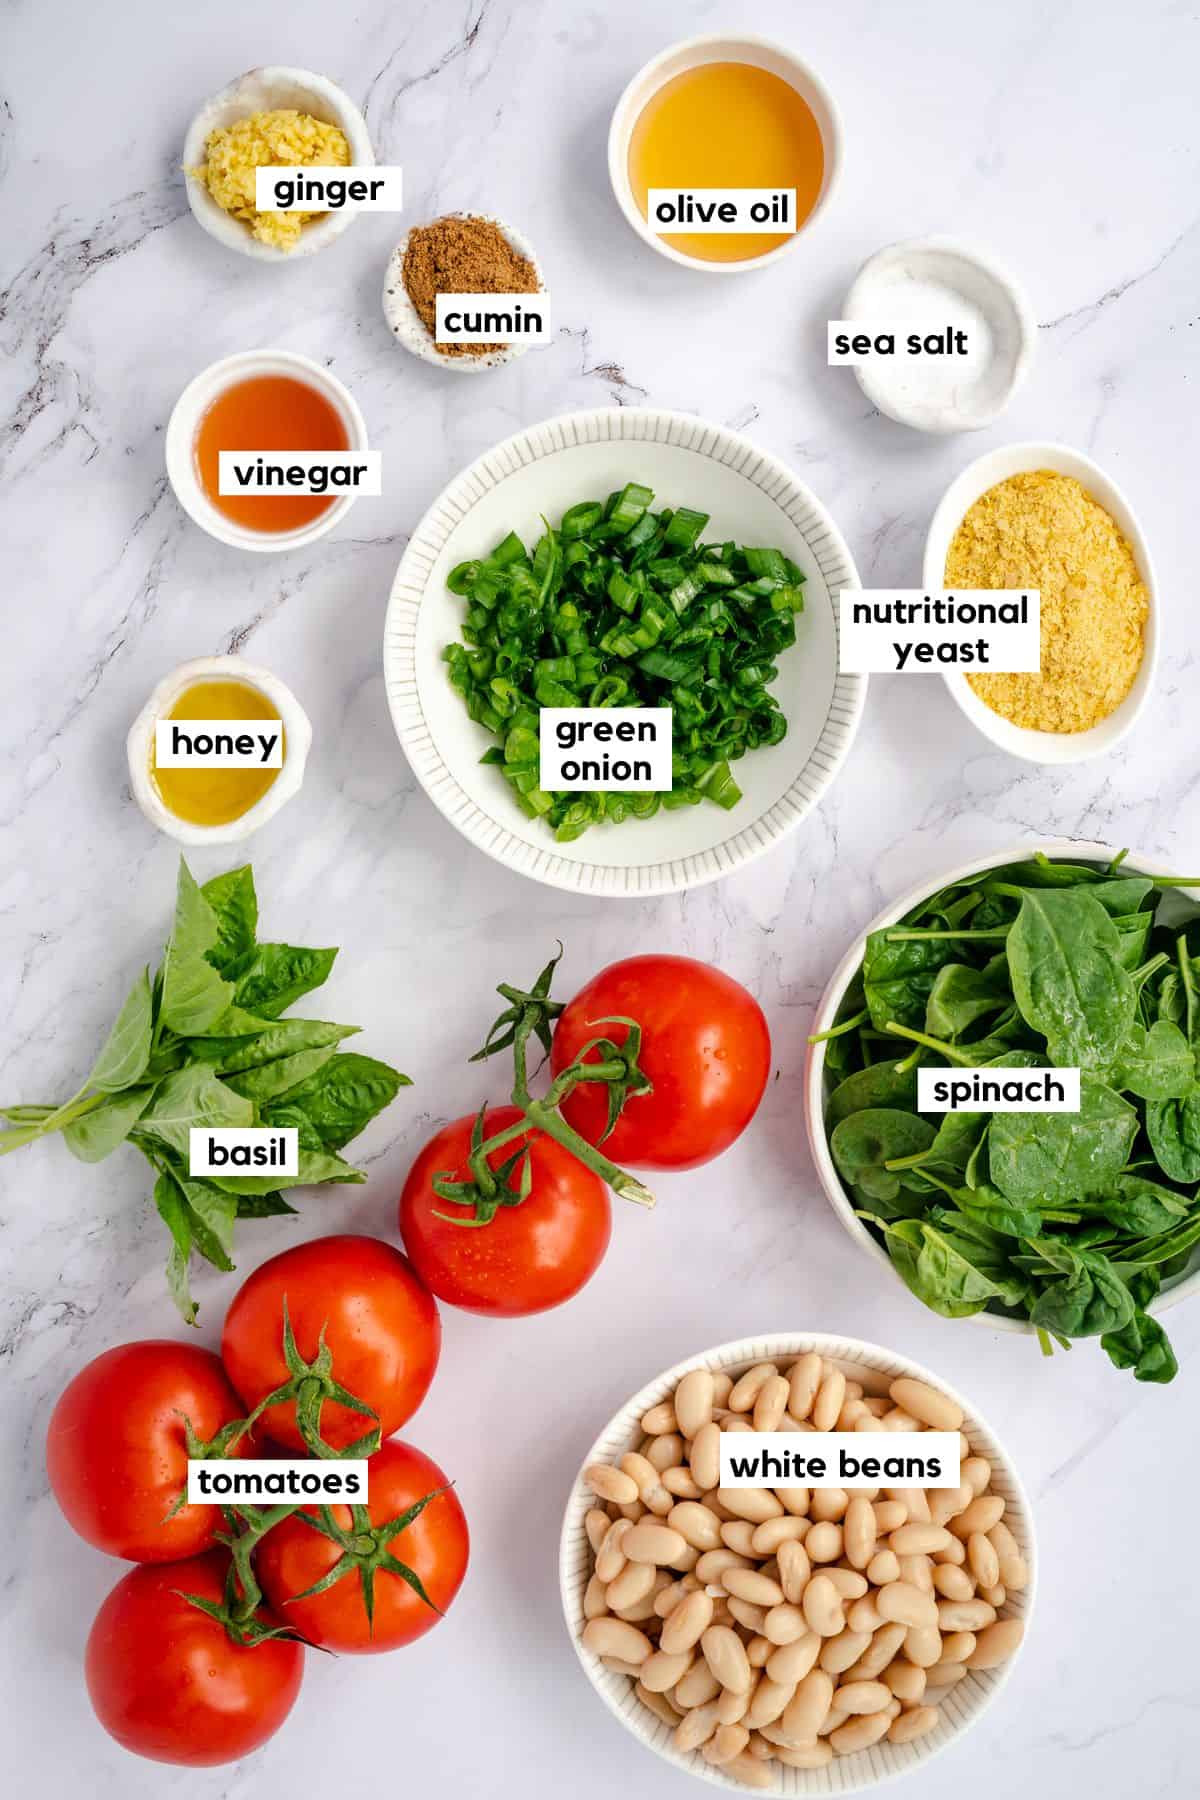 labeled ingredients for baked stuffed tomatoes.